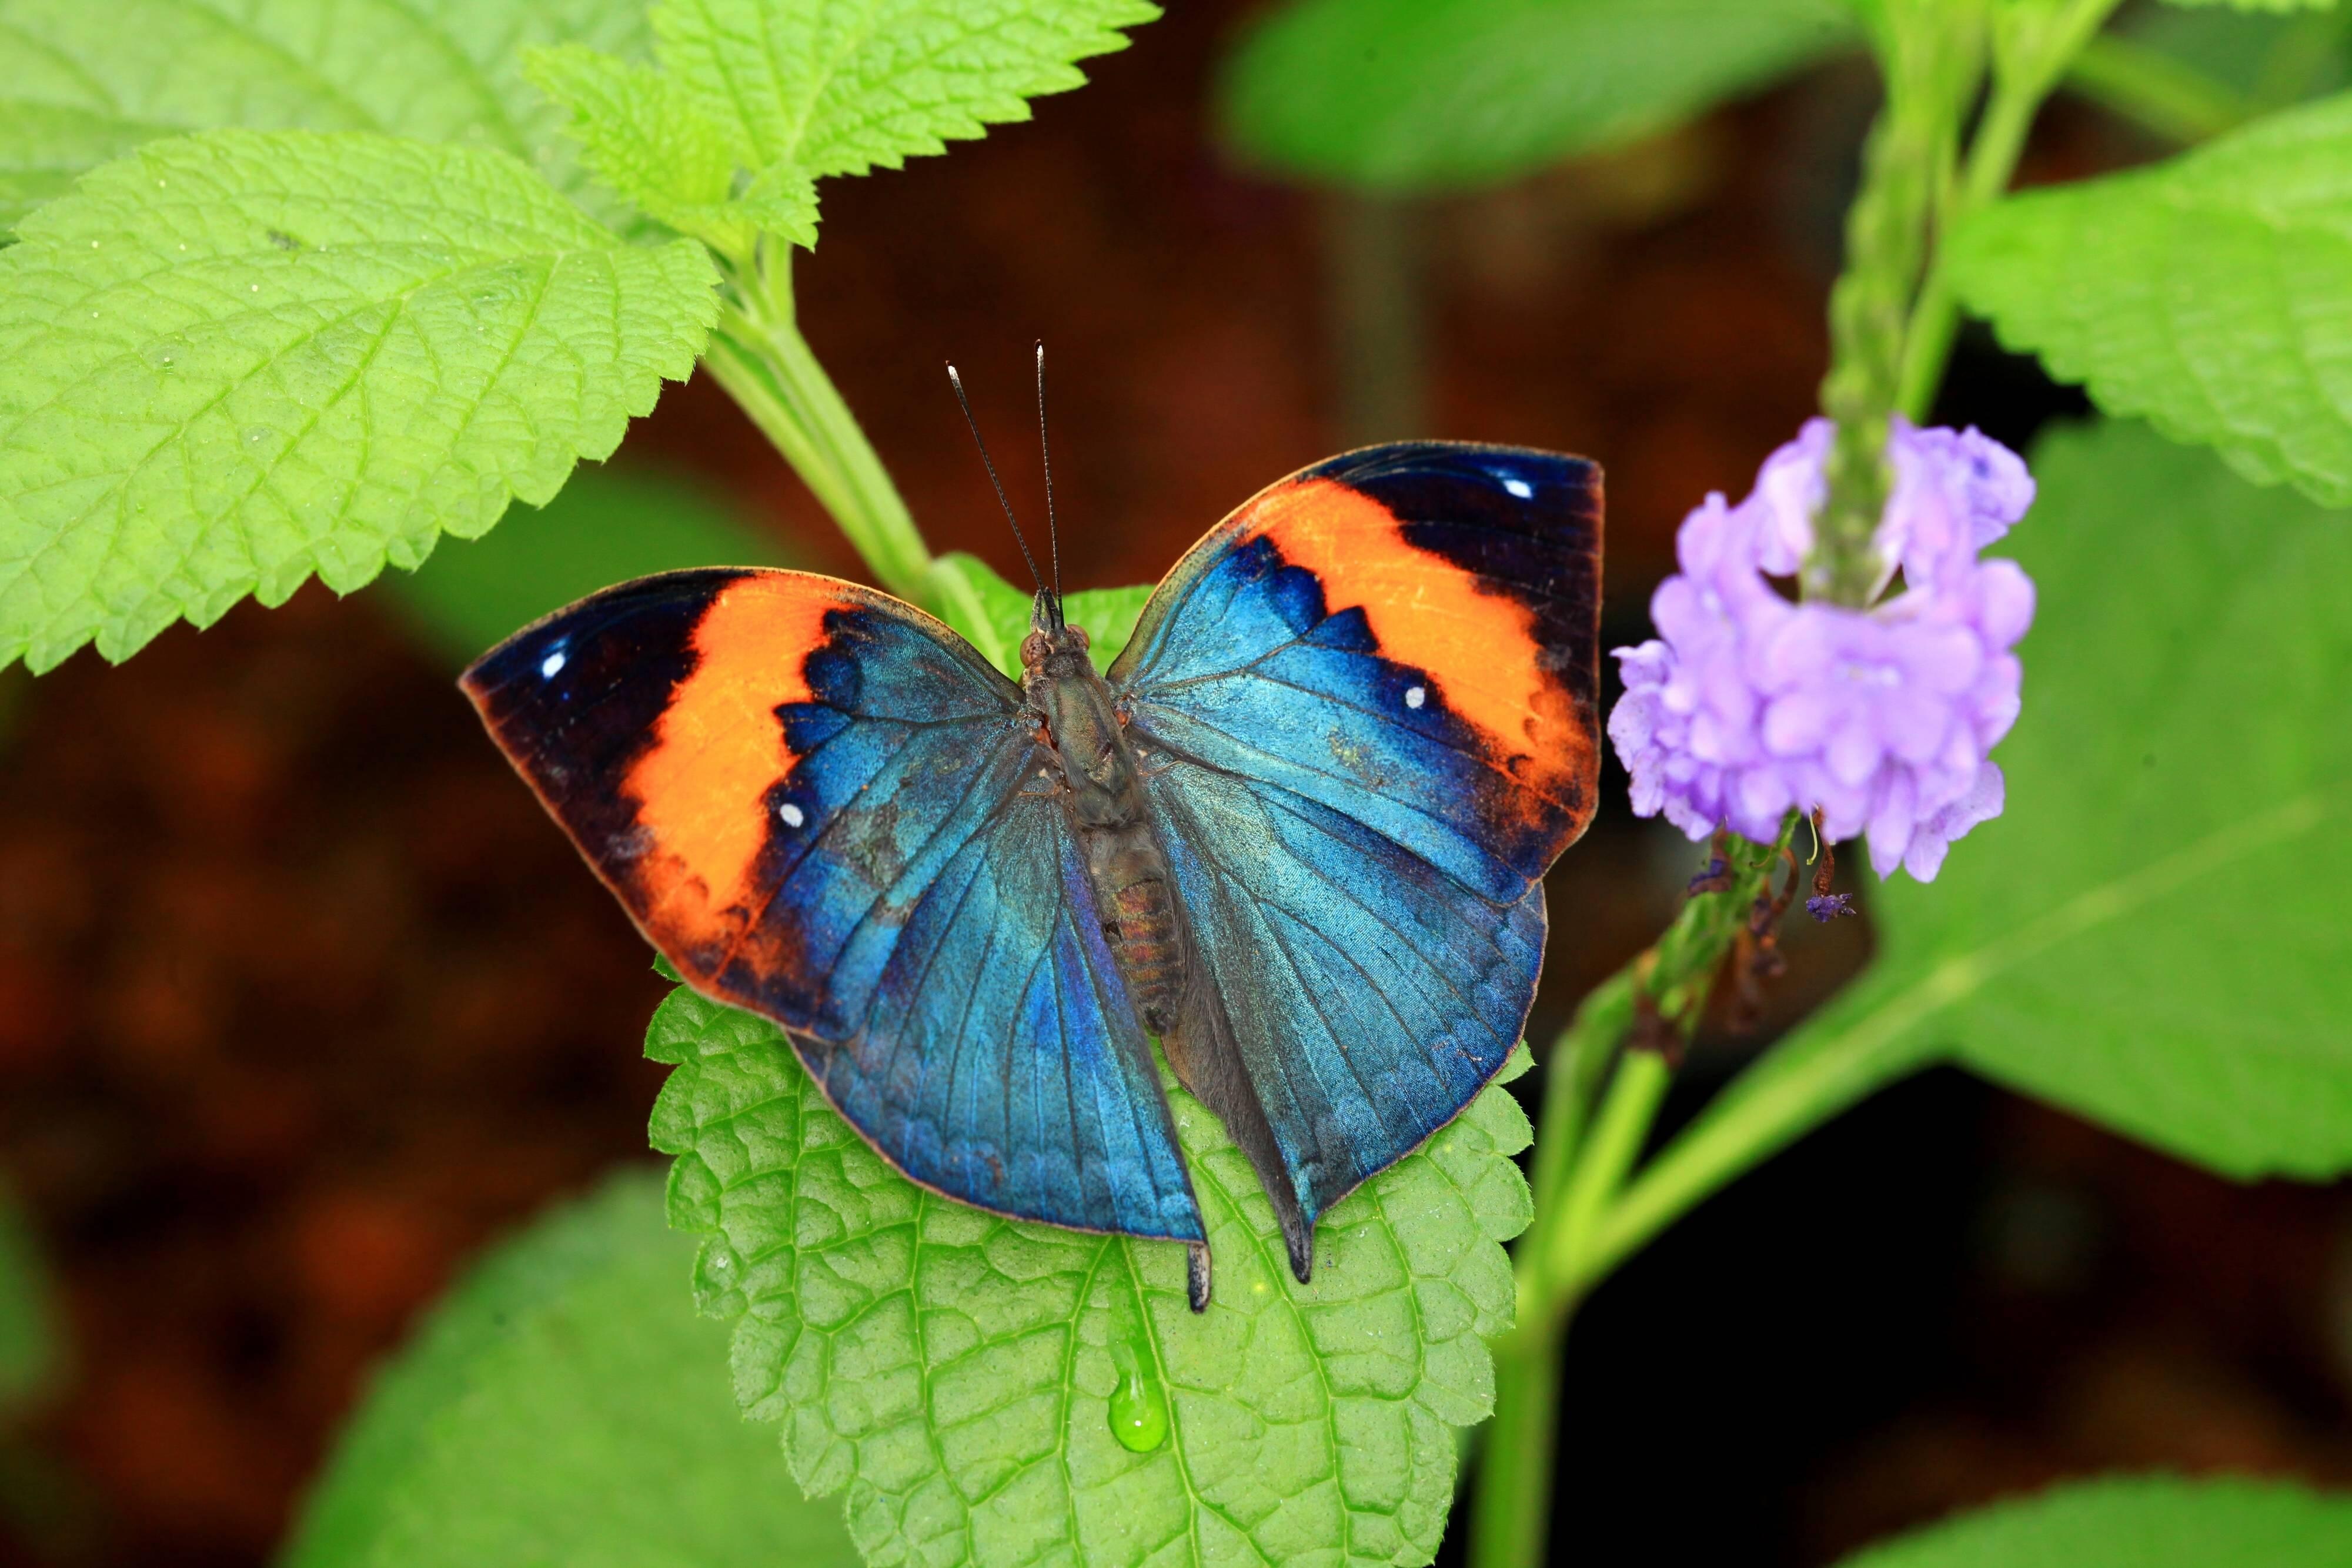 Blue butterfly with orange and black tipped wings perched by purple flower